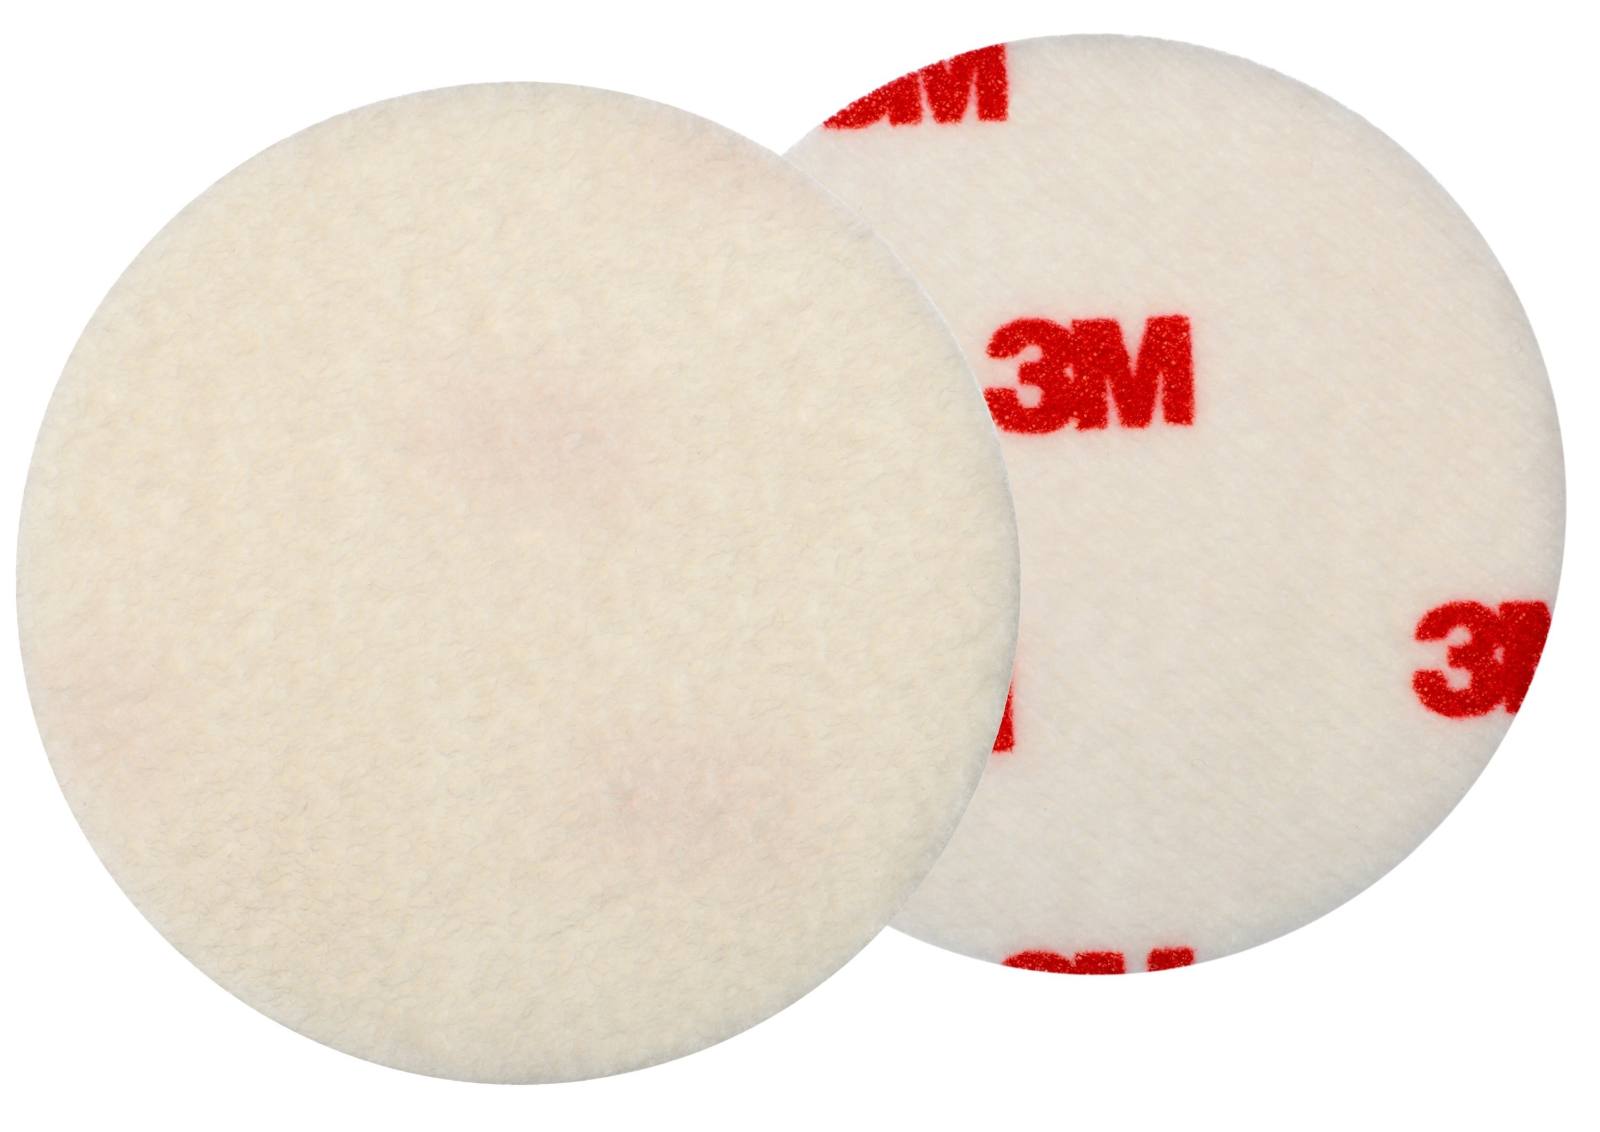 3M Finesse-it Polierscheibe, Buffing Pad, rot/weiß, 125 mm #50017